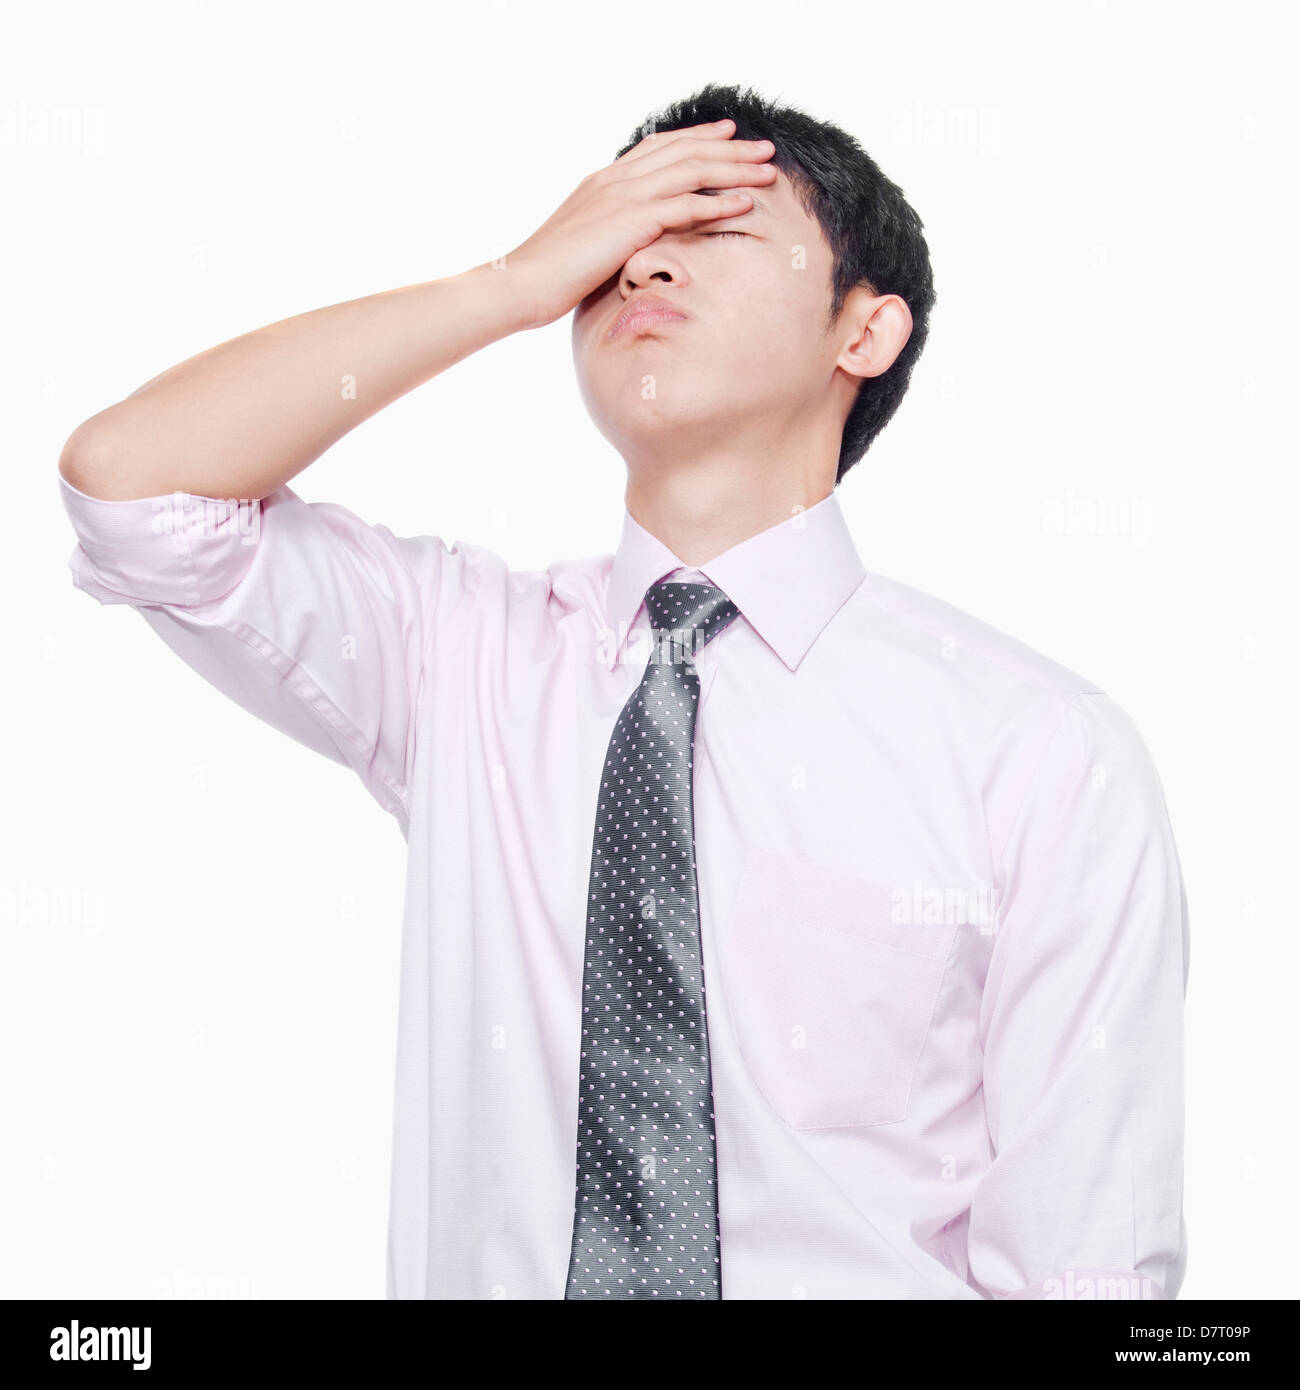 Young man with hand on forehead Stock Photo